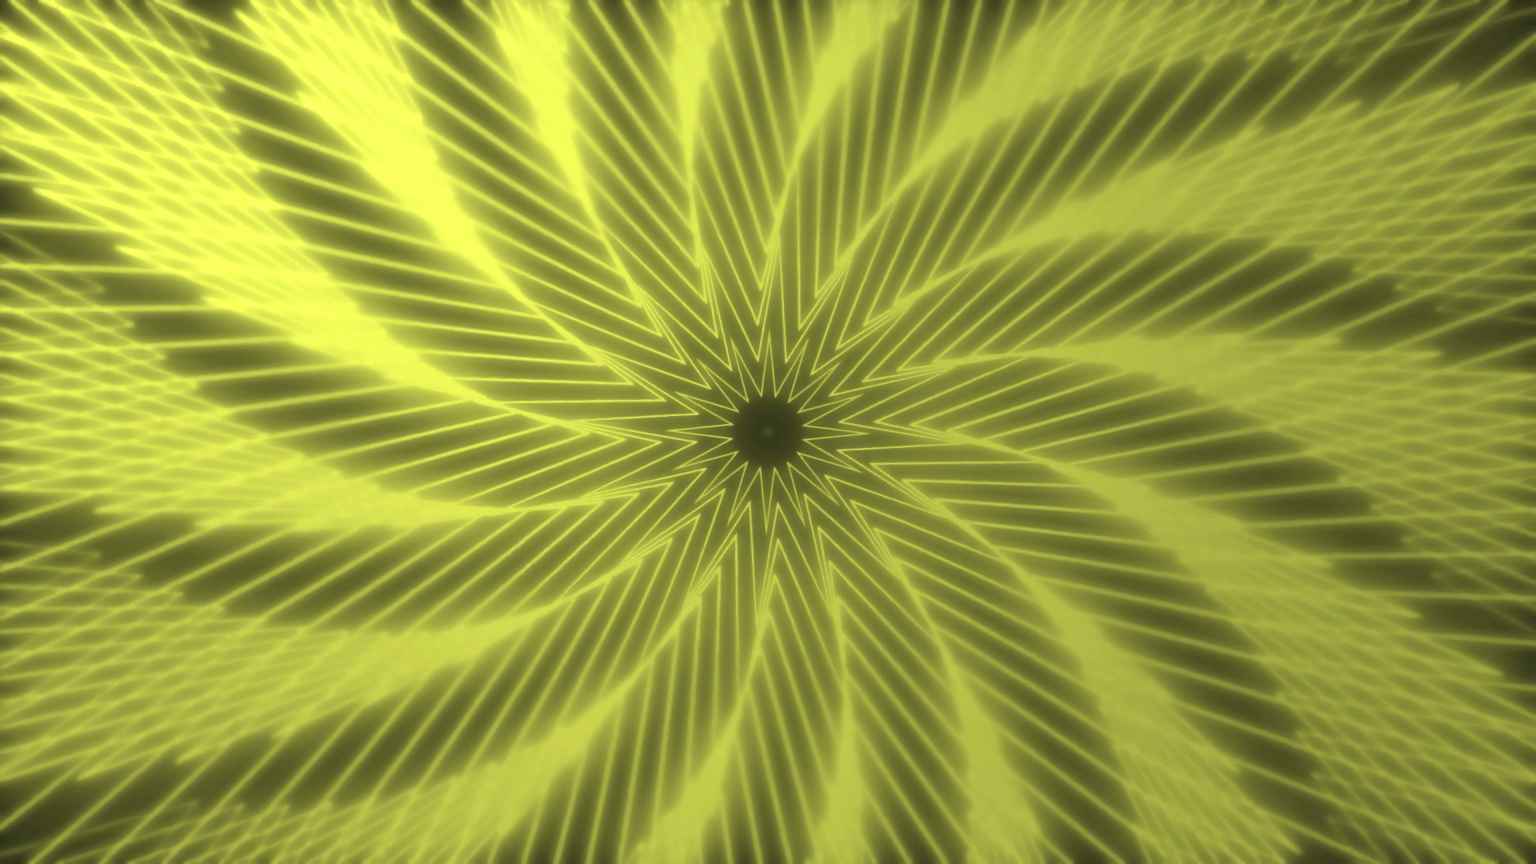 4K Glowing Yellow Spiral Looped Screensaver || Free To Use UHD Motion Background || FREE DOWNLOAD